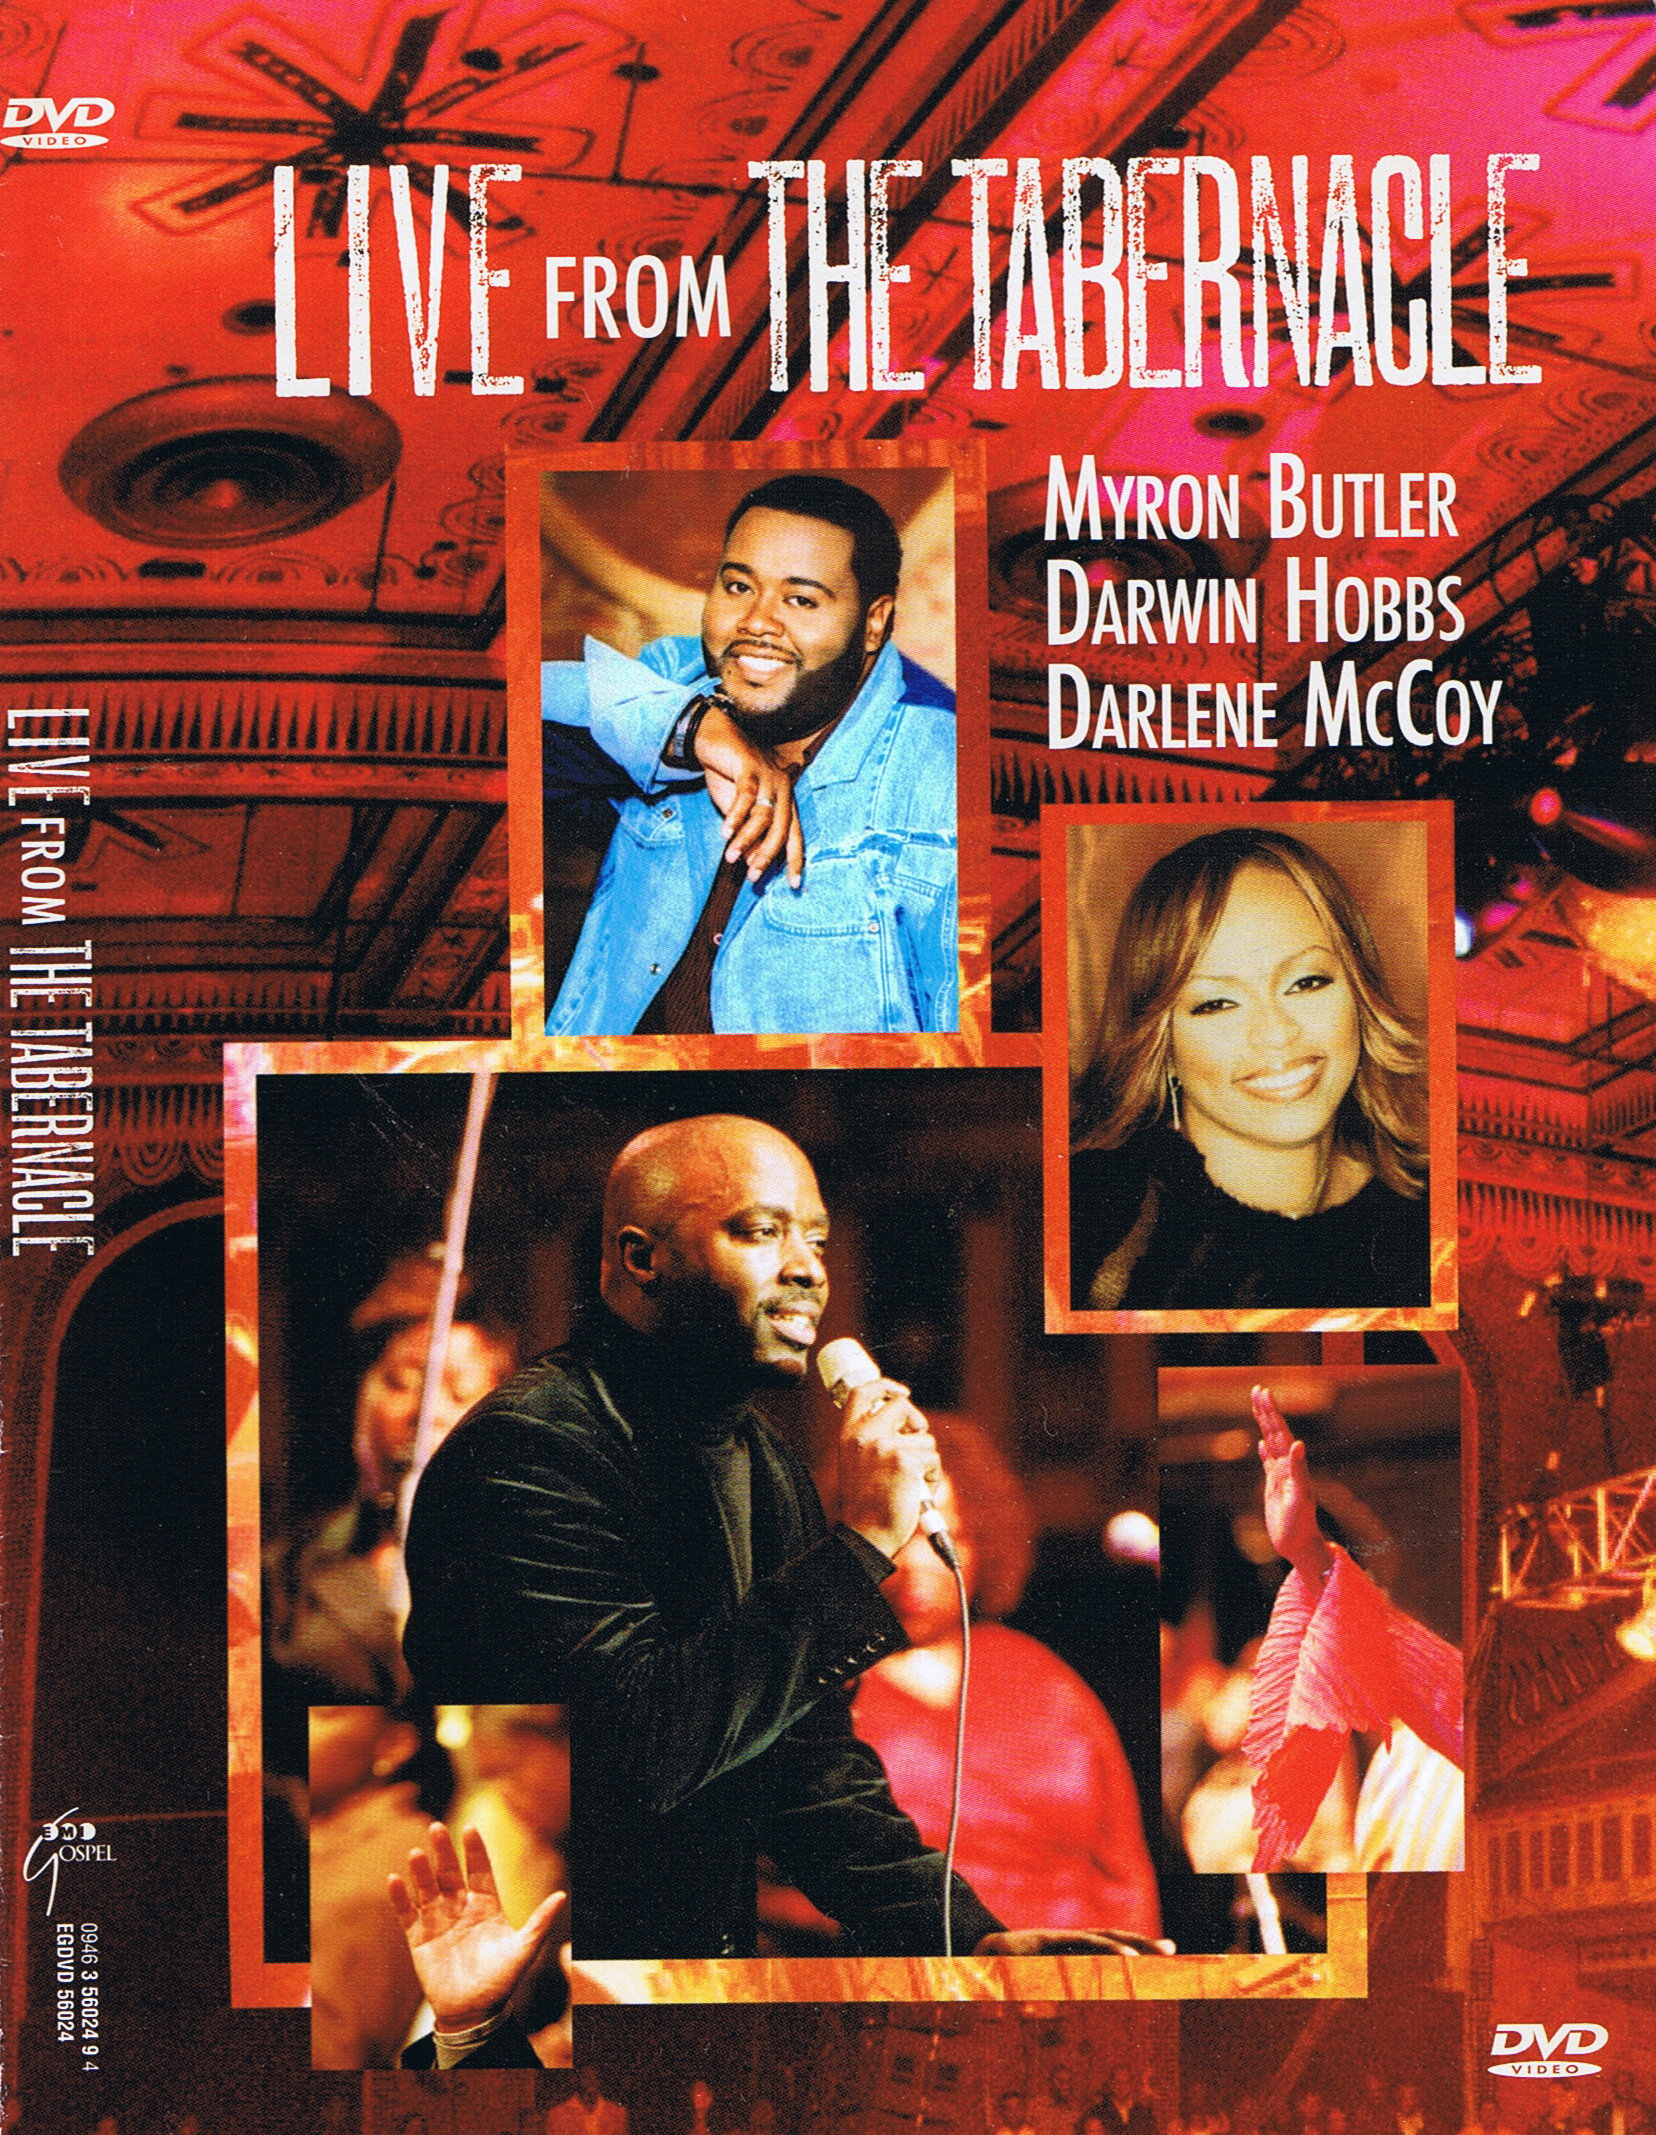 Another successful DVD release from EMI Gospel/Christian Music Group, recorded live at the famous Tabernacle, Atlanta, produced by Sunrise Entertainment.